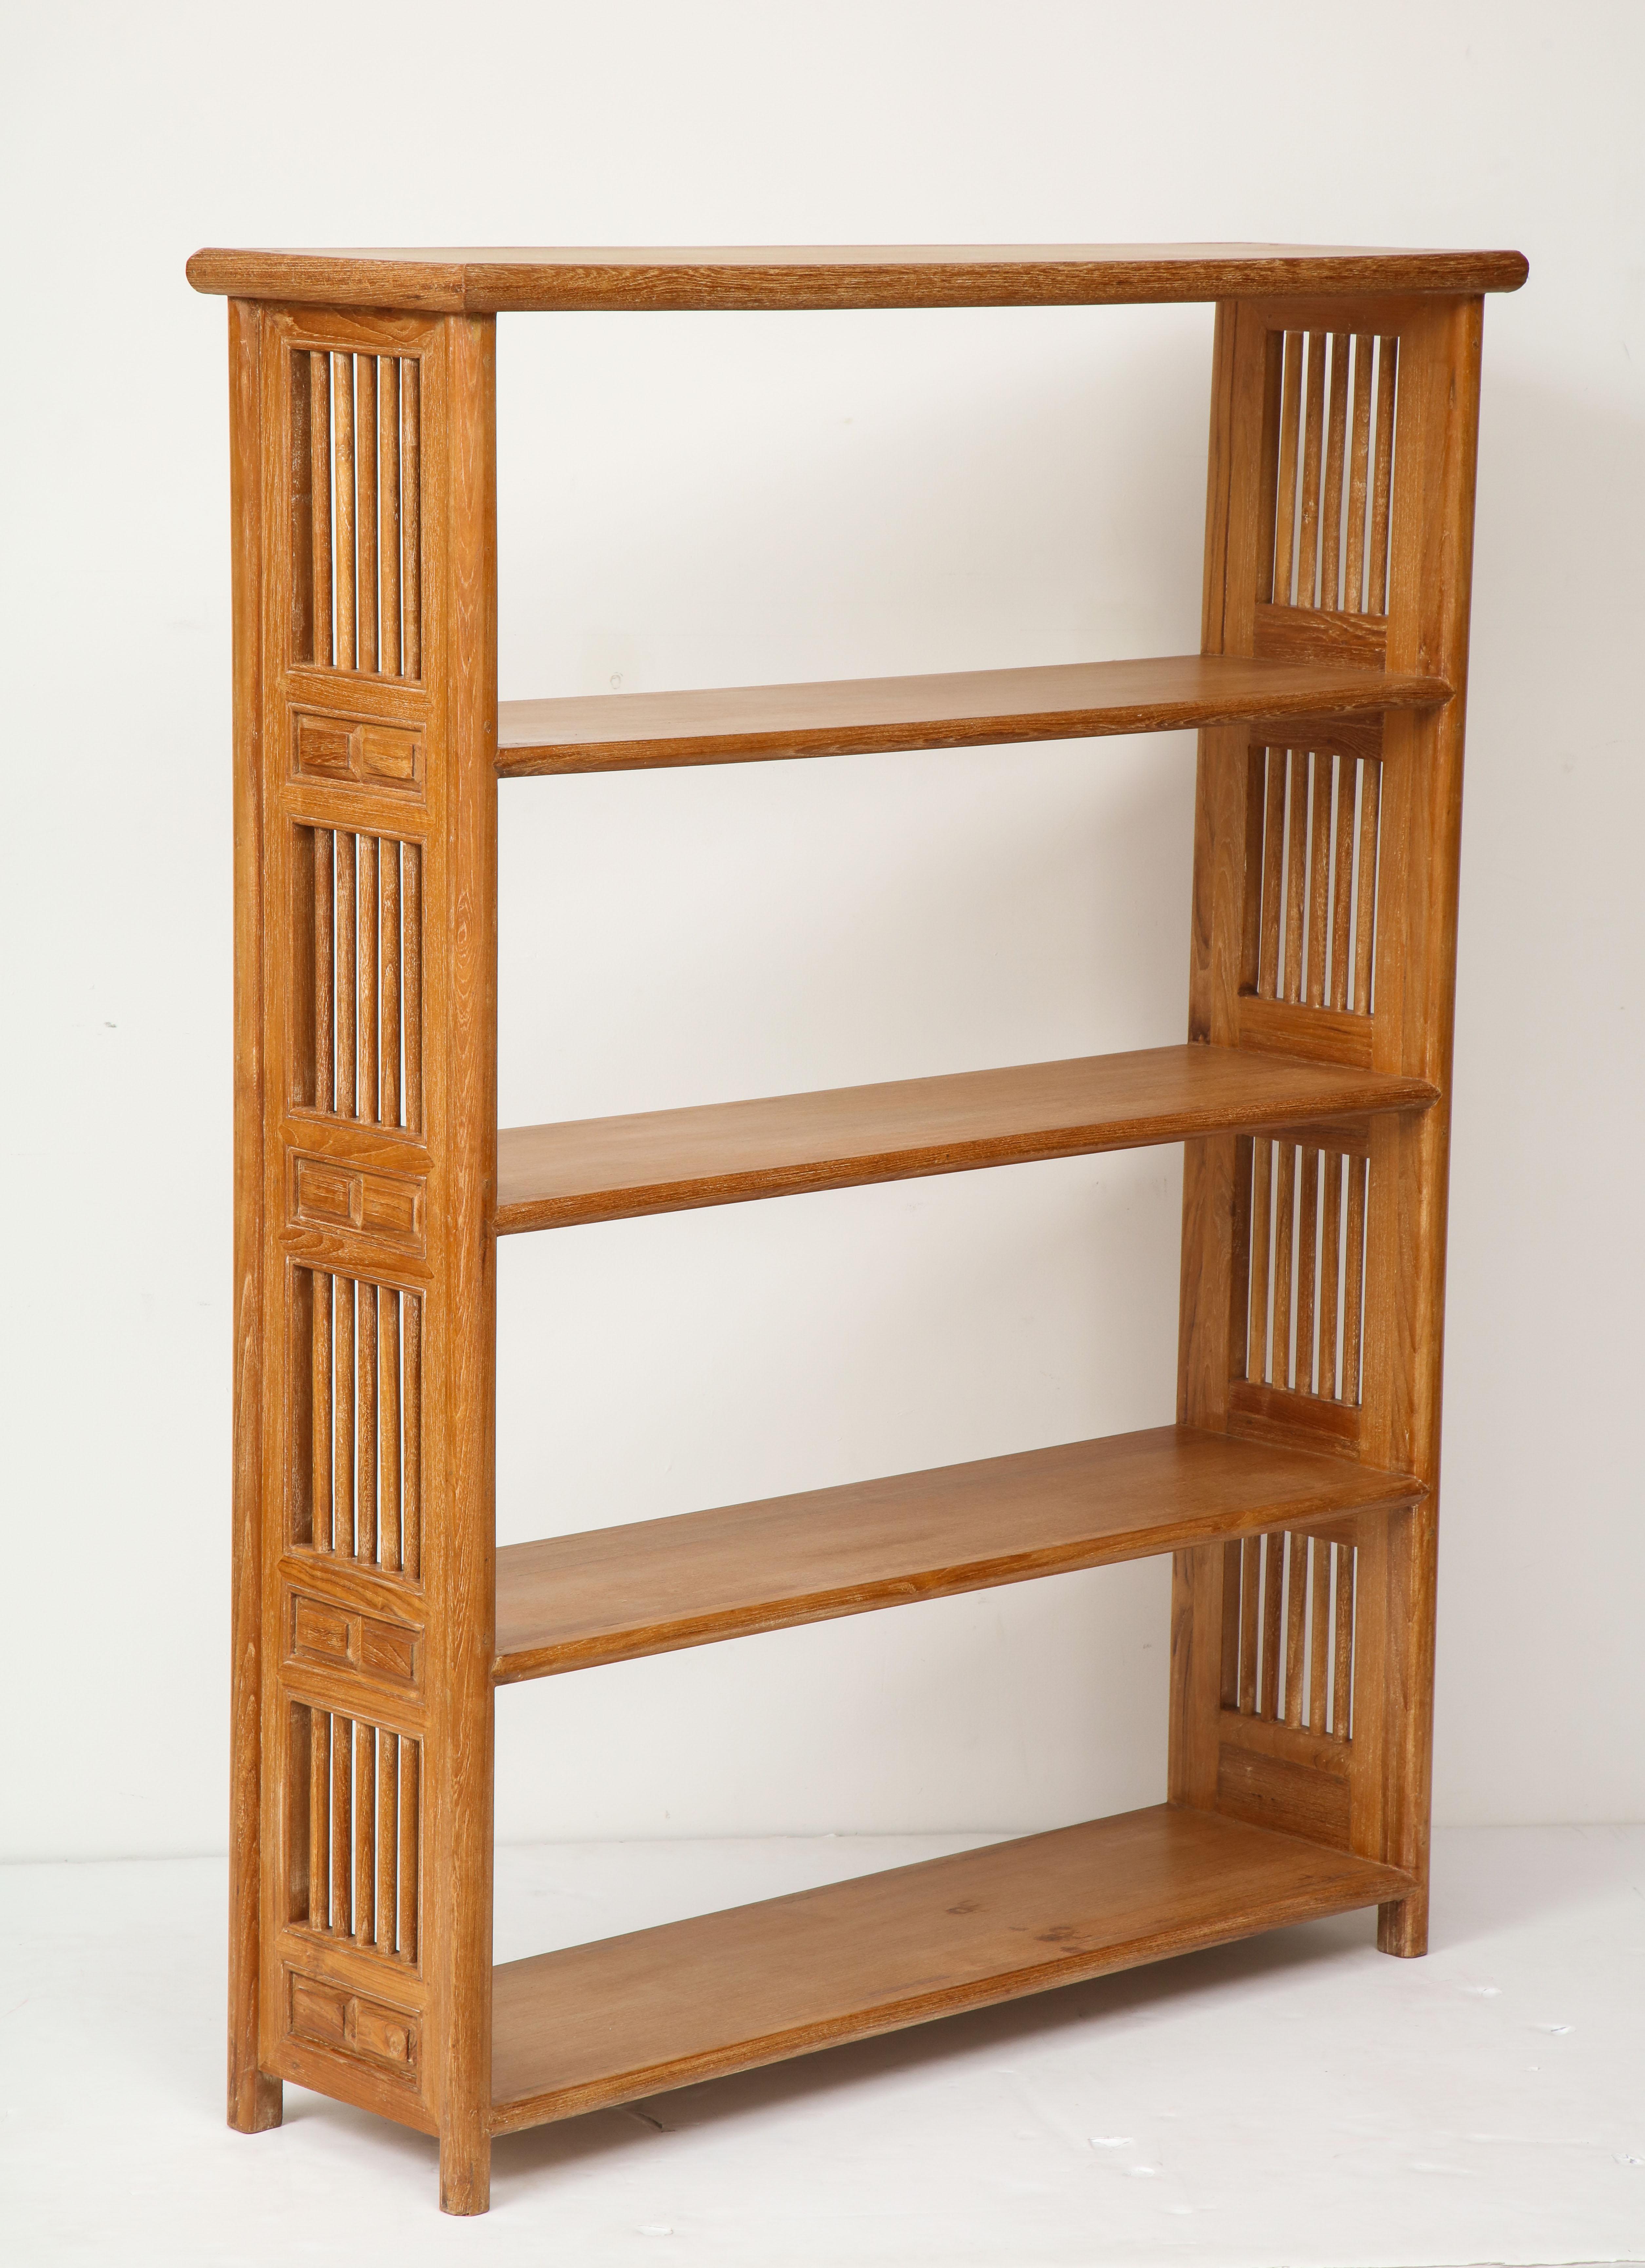 Pair of cerused oak bookcases in the Vienna secessionist manner.